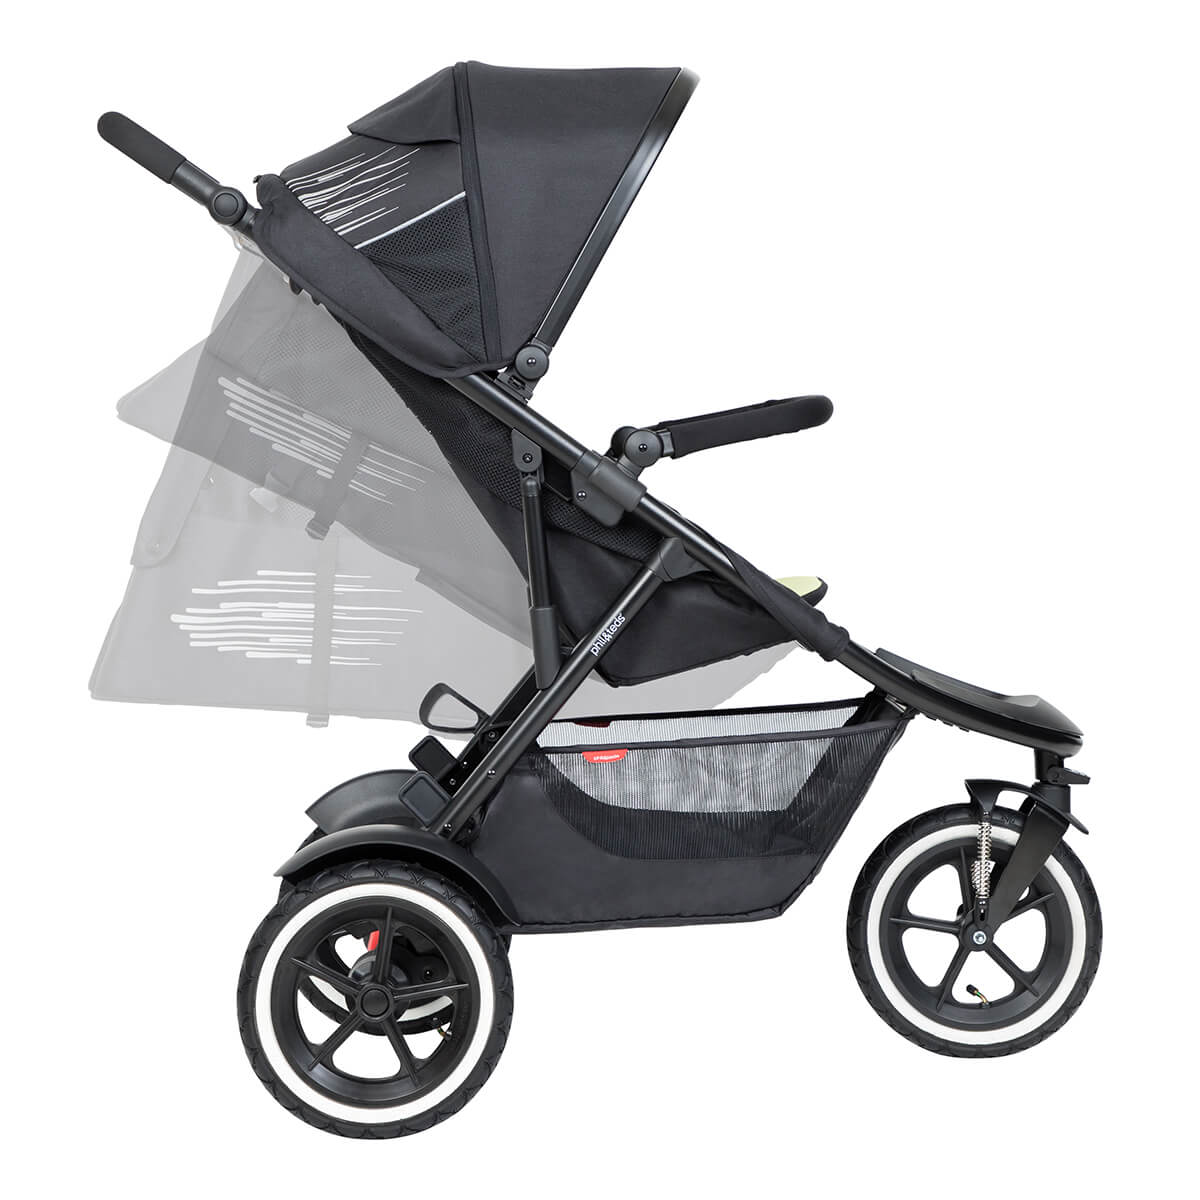 https://cdn.accentuate.io/7671658676402/19437753335986/philteds-sport-buggy-can-recline-in-multiple-angles-including-full-recline-for-newborn-baby-v1682472777340.jpg?1200x1200